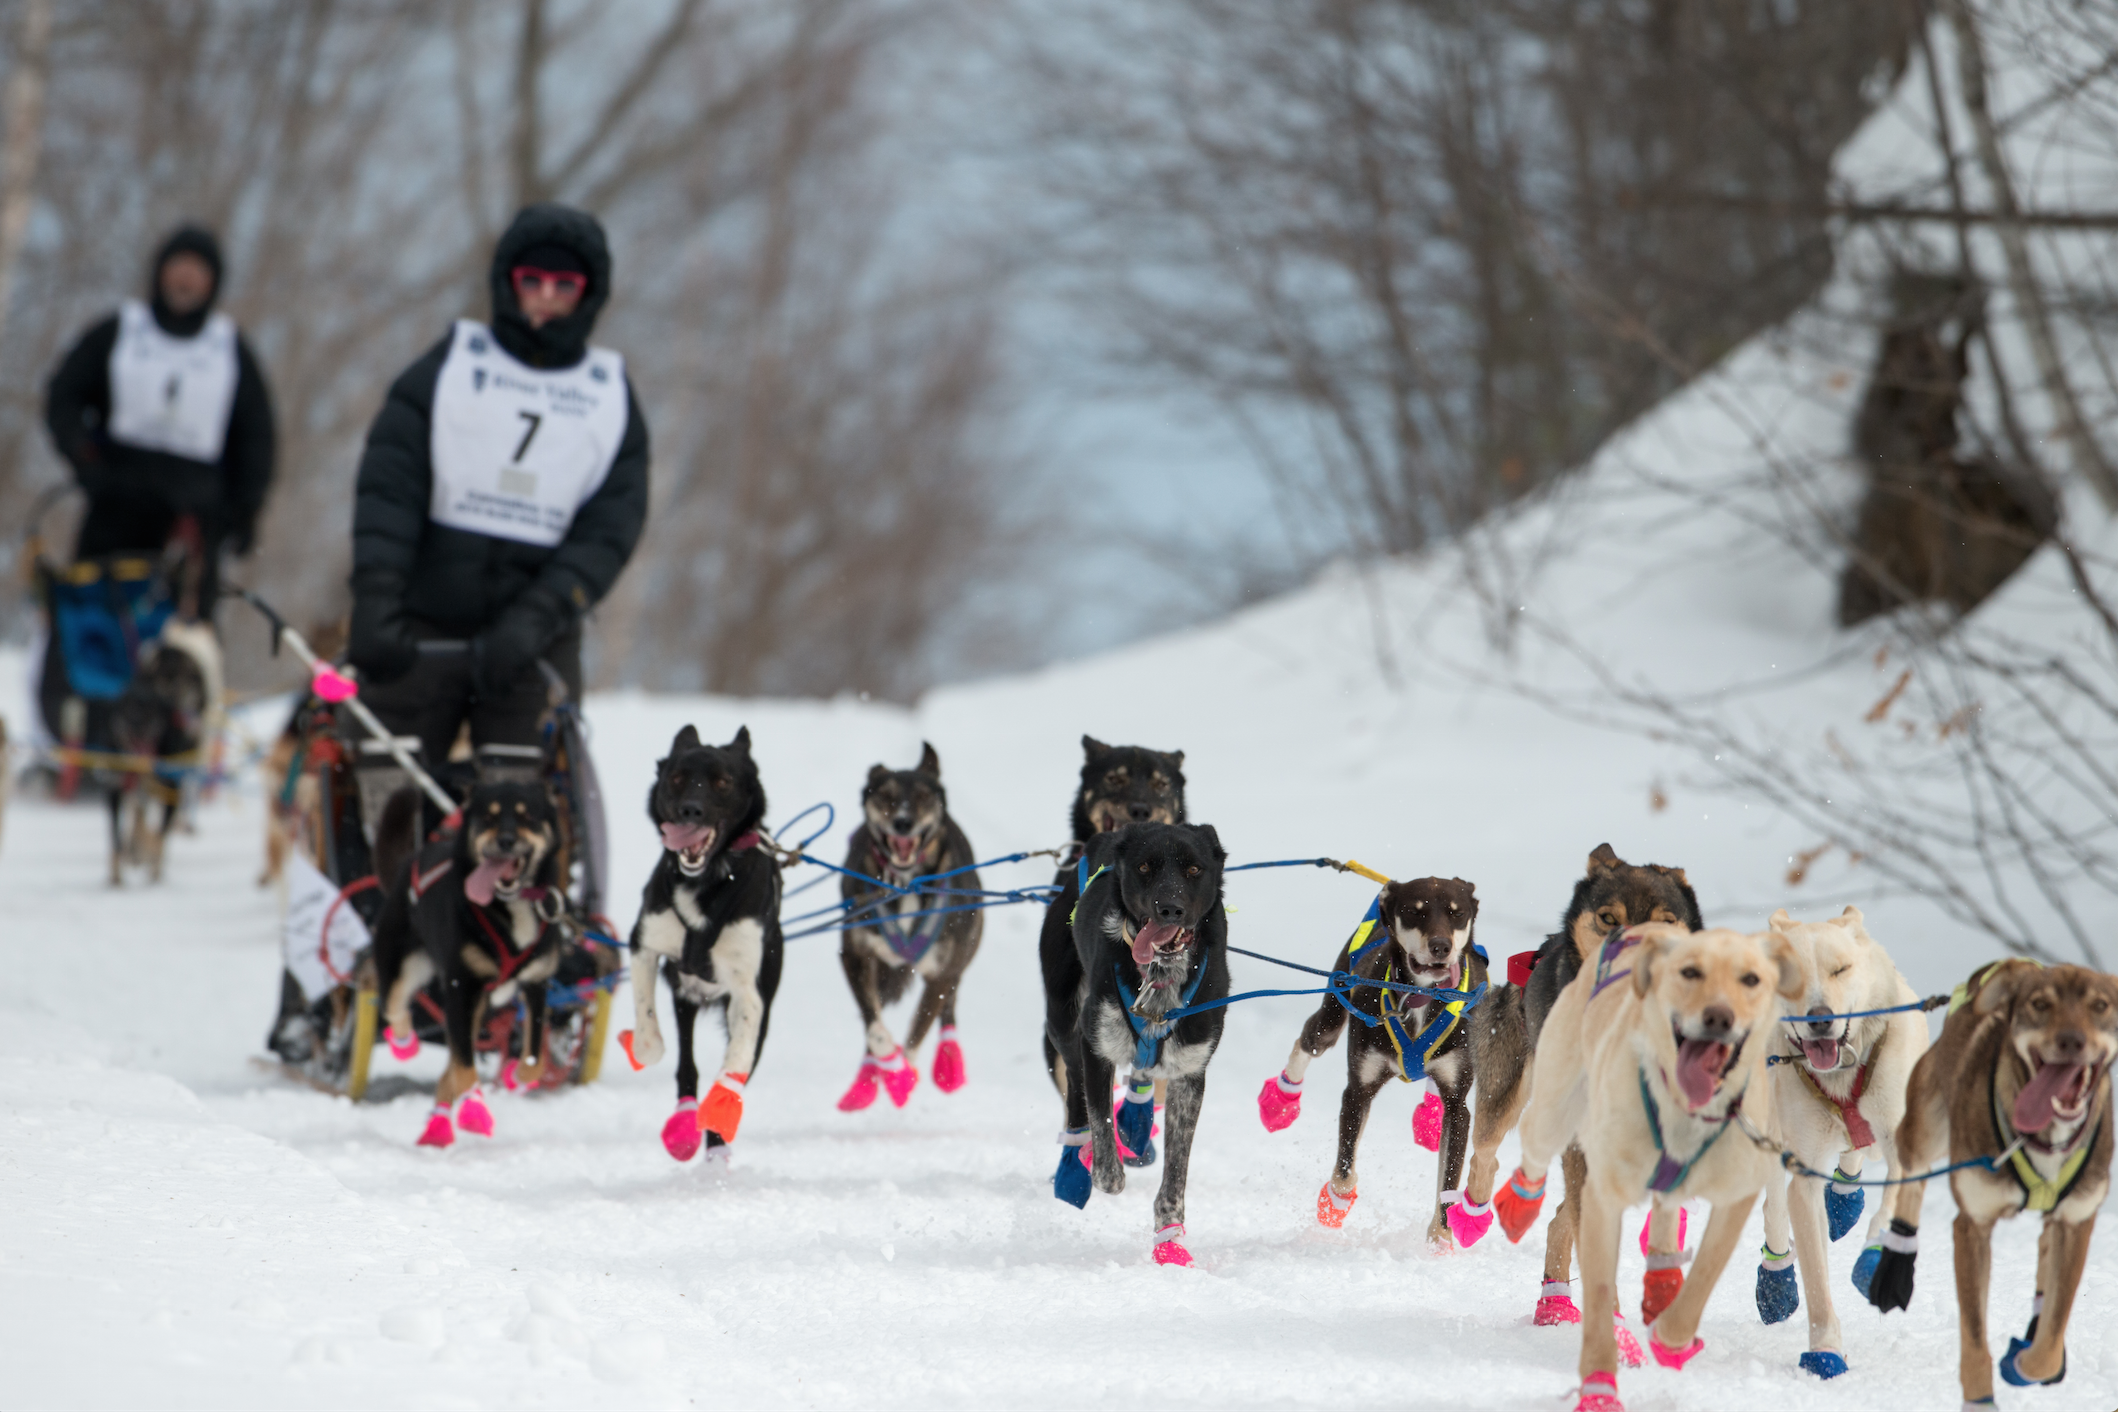 Blair Braverman's dog sled team runs in the snow during the 2019 Iditarod in